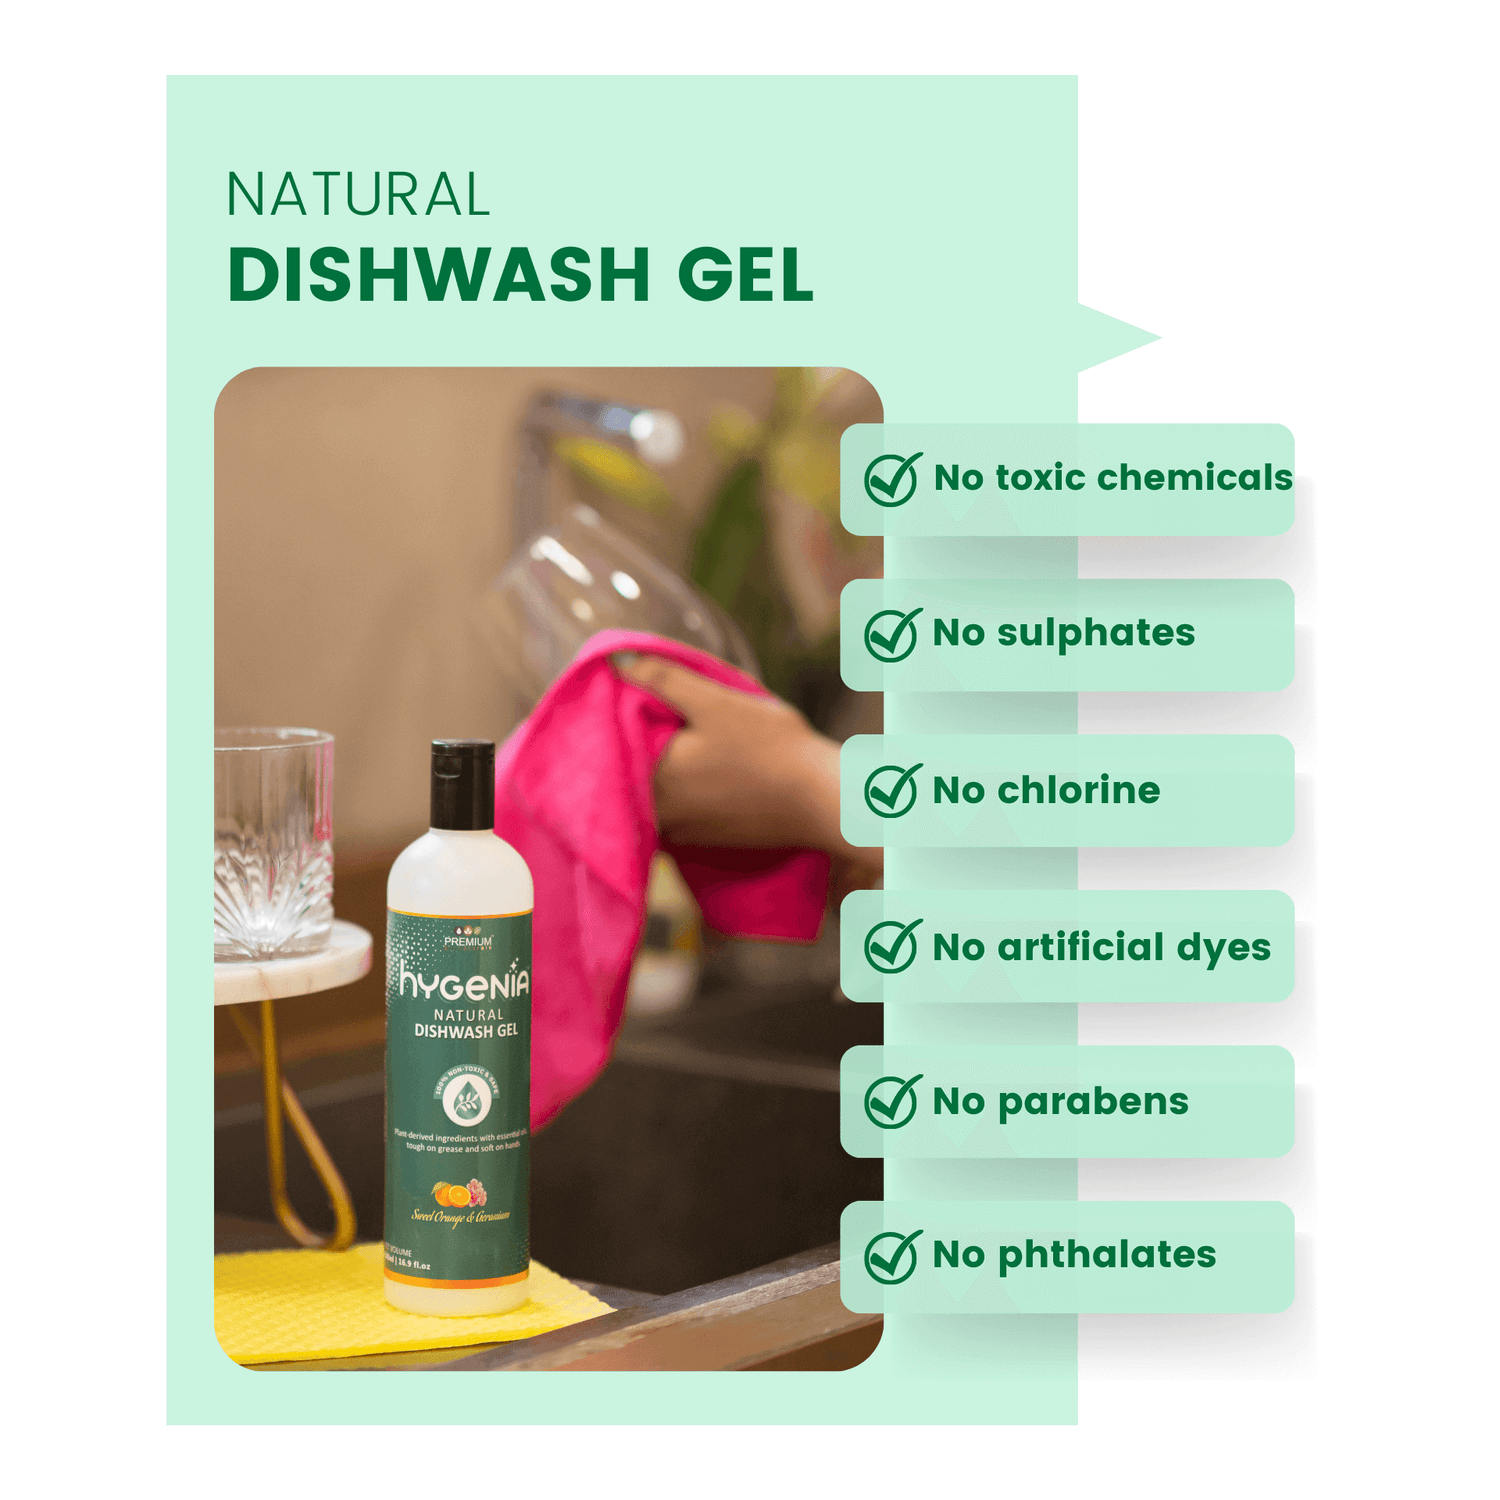 Experience the power of nature with our dishwash gel&